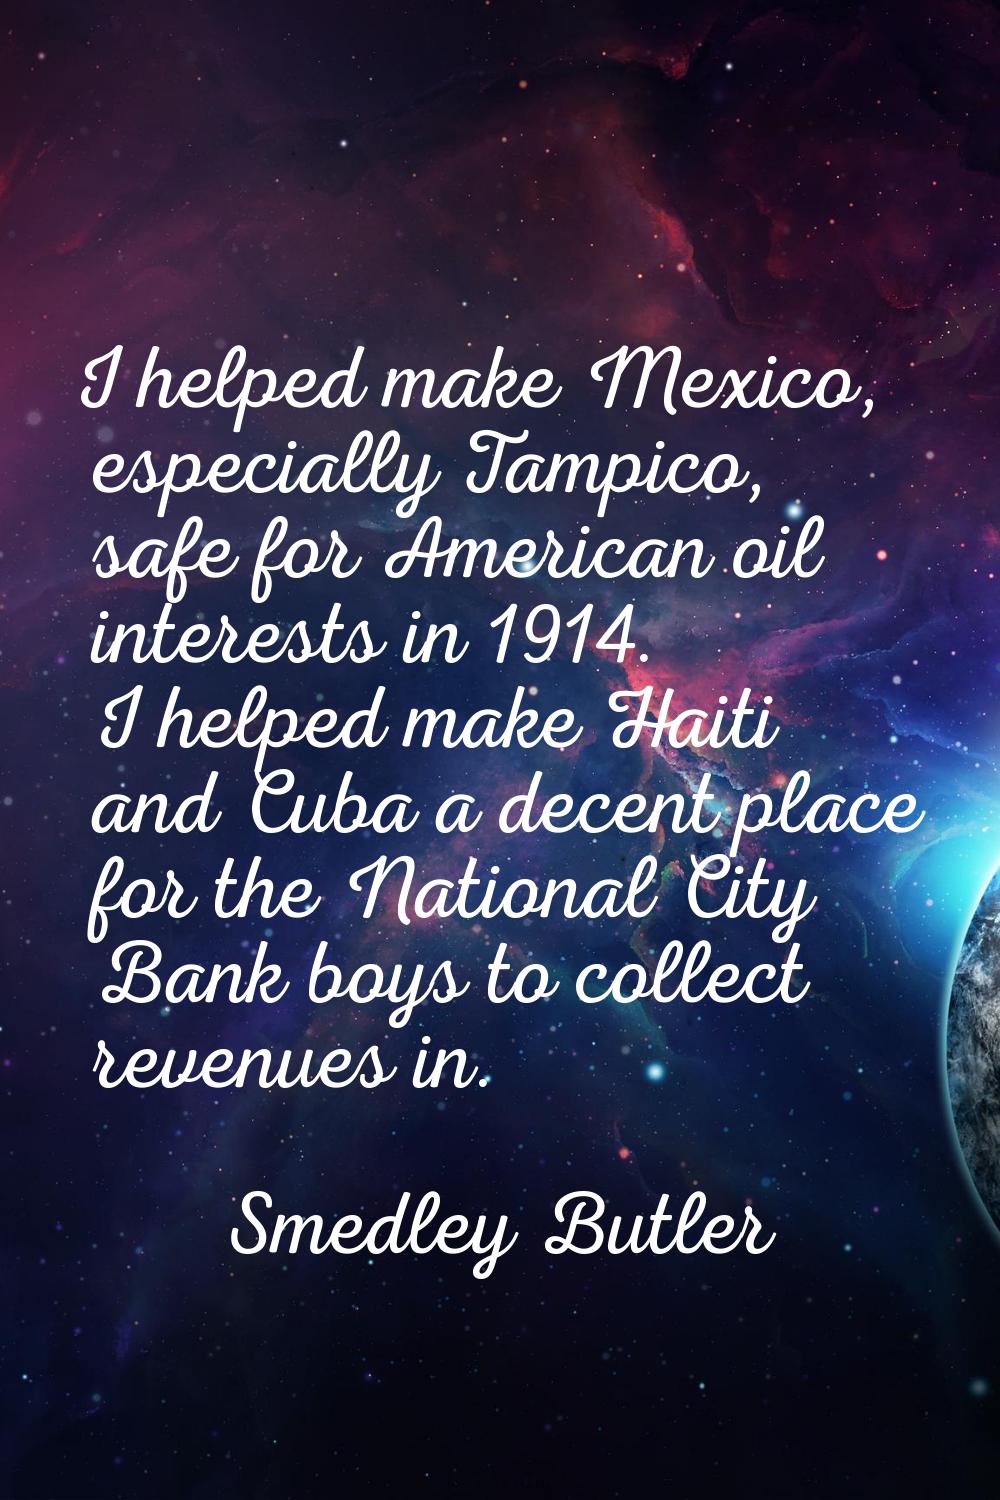 I helped make Mexico, especially Tampico, safe for American oil interests in 1914. I helped make Ha